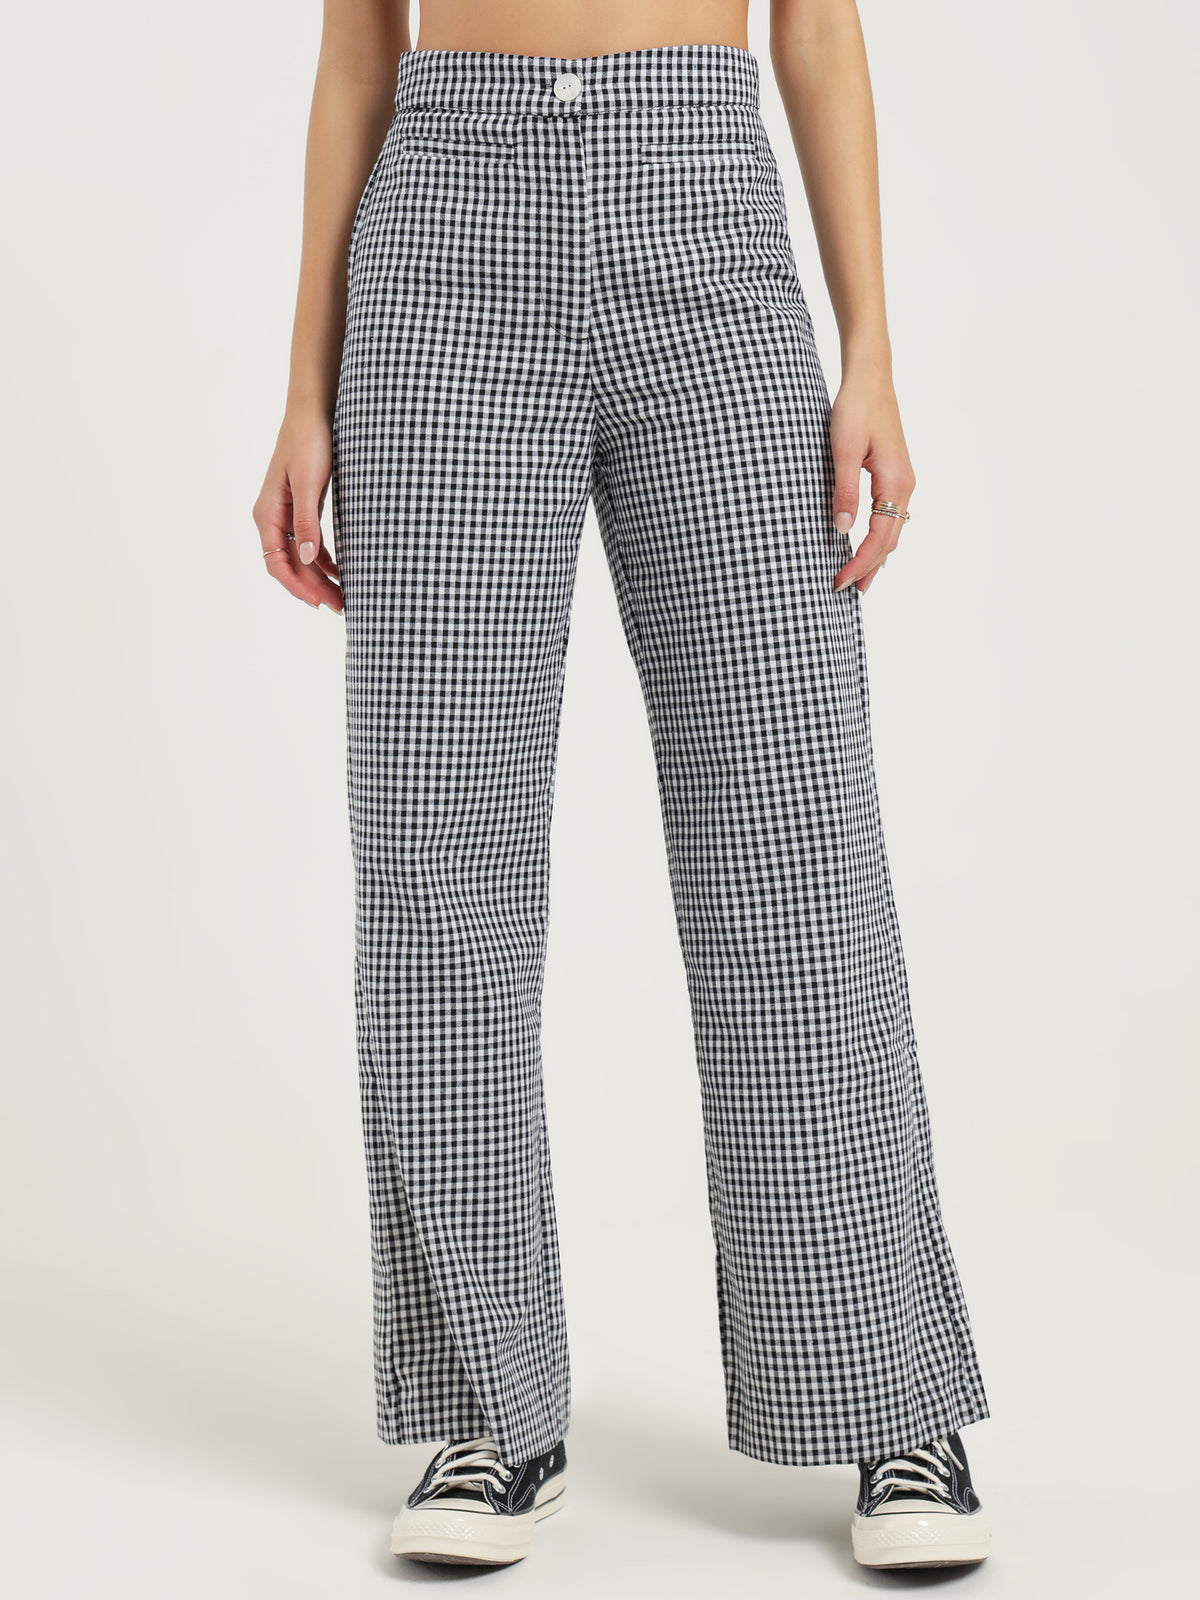 Tully Pants in Black Gingham